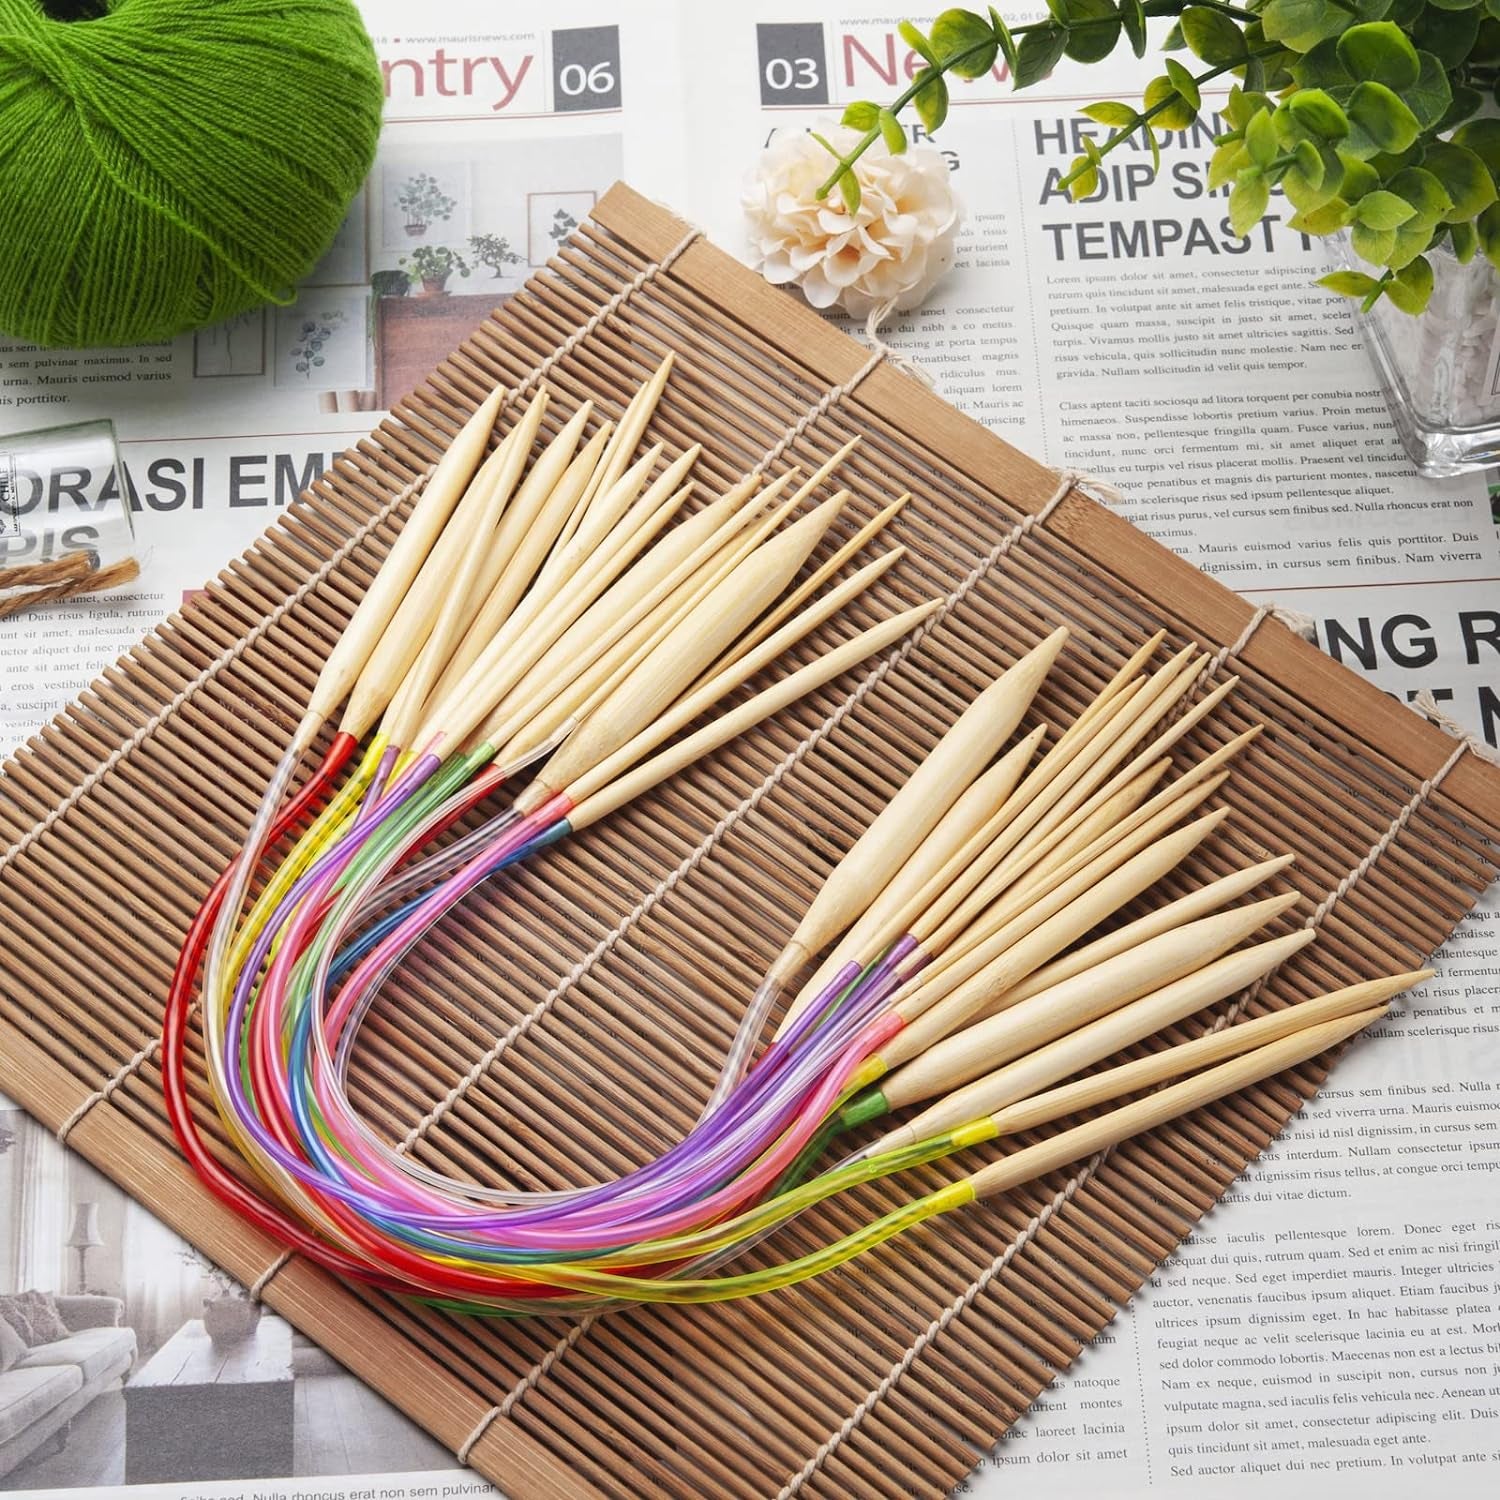 Bamboo Circular Knitting Needles 16 Inch for Beginners, 18 Pairs Wooden round Knitting Needles for Yarn with Colored Plastic Tube, 18 Sizes US 0-15 (2-10Mm), Double Pointed Flexible Knitting Needles